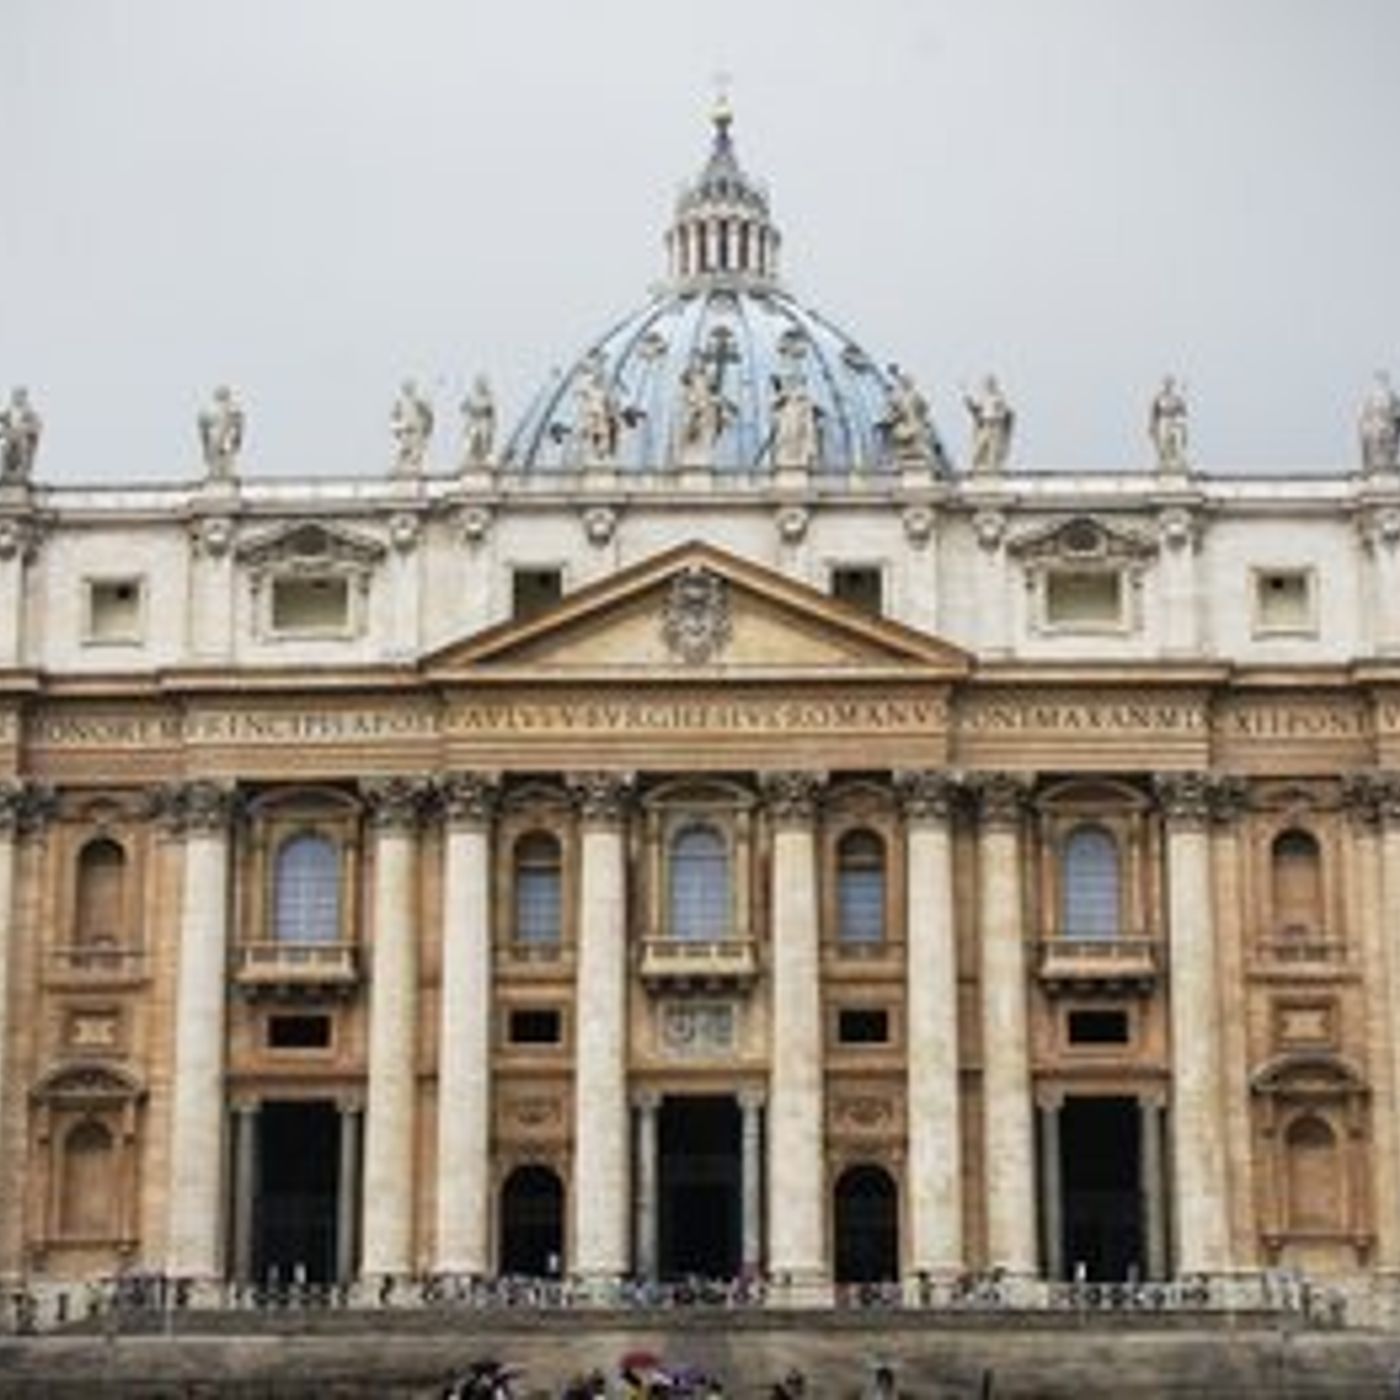 28: The Story Behind The Architecture and Construction of St Peter's Basilica